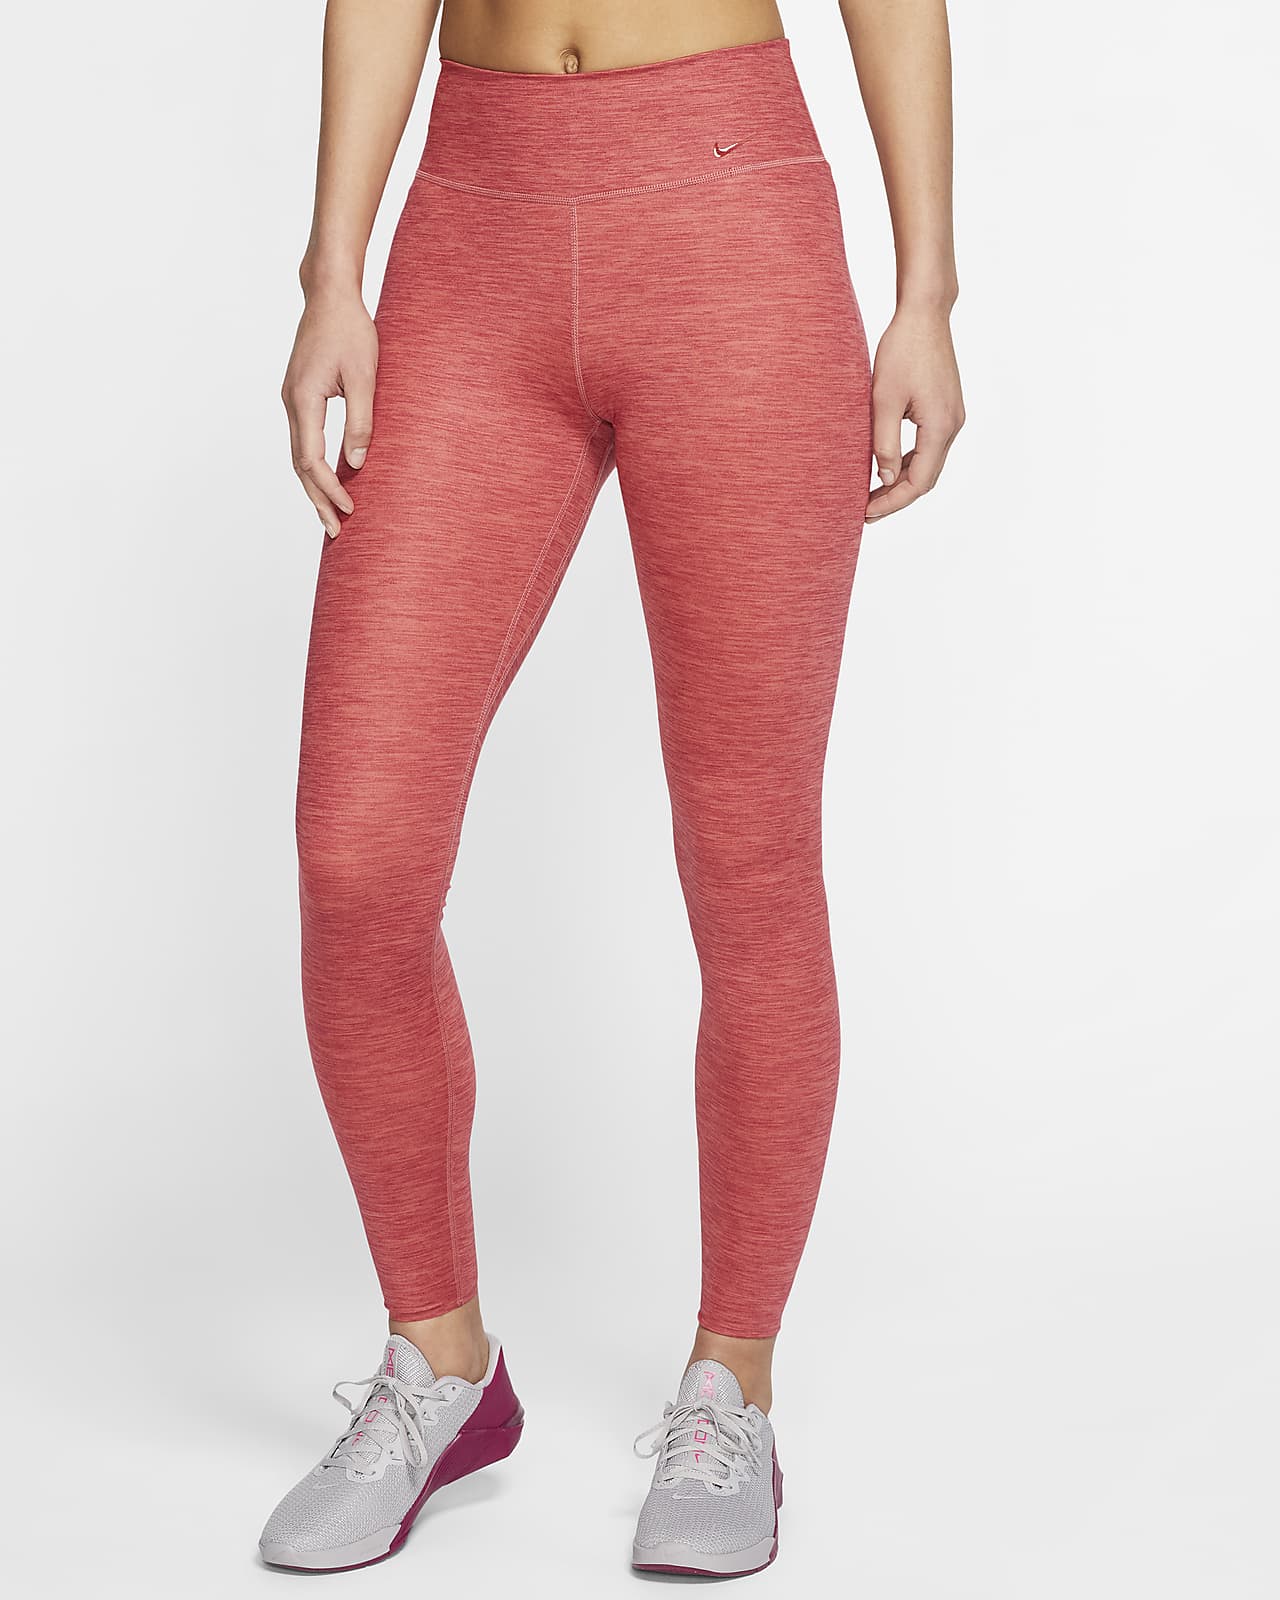 Nike One Luxe Women's Heathered Mid-Rise Tights. Nike.com